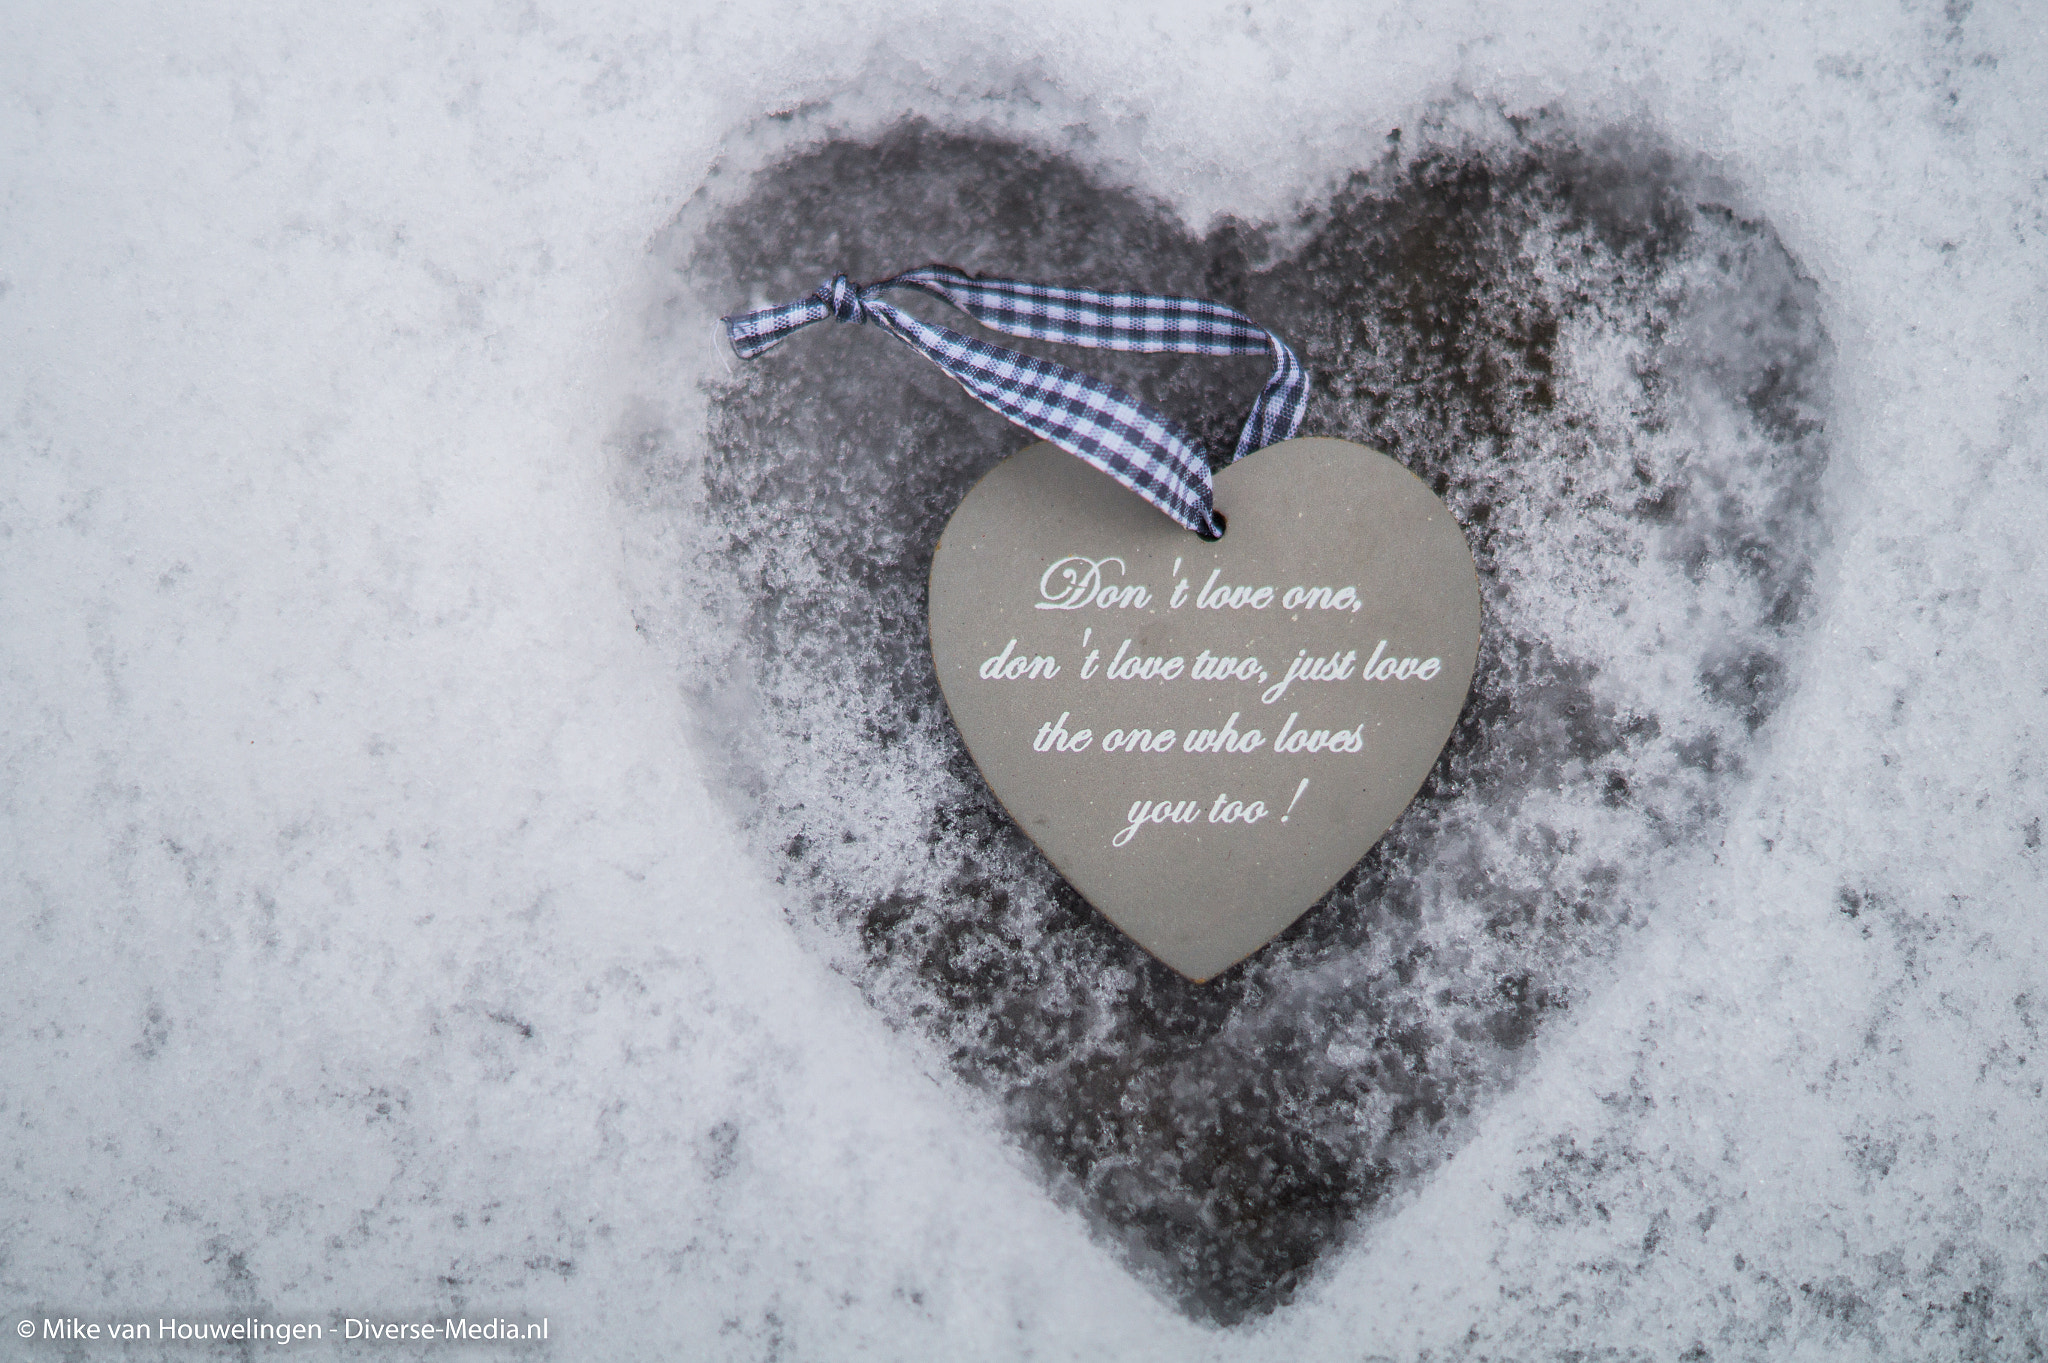 Sony SLT-A58 sample photo. Love in the snow photography